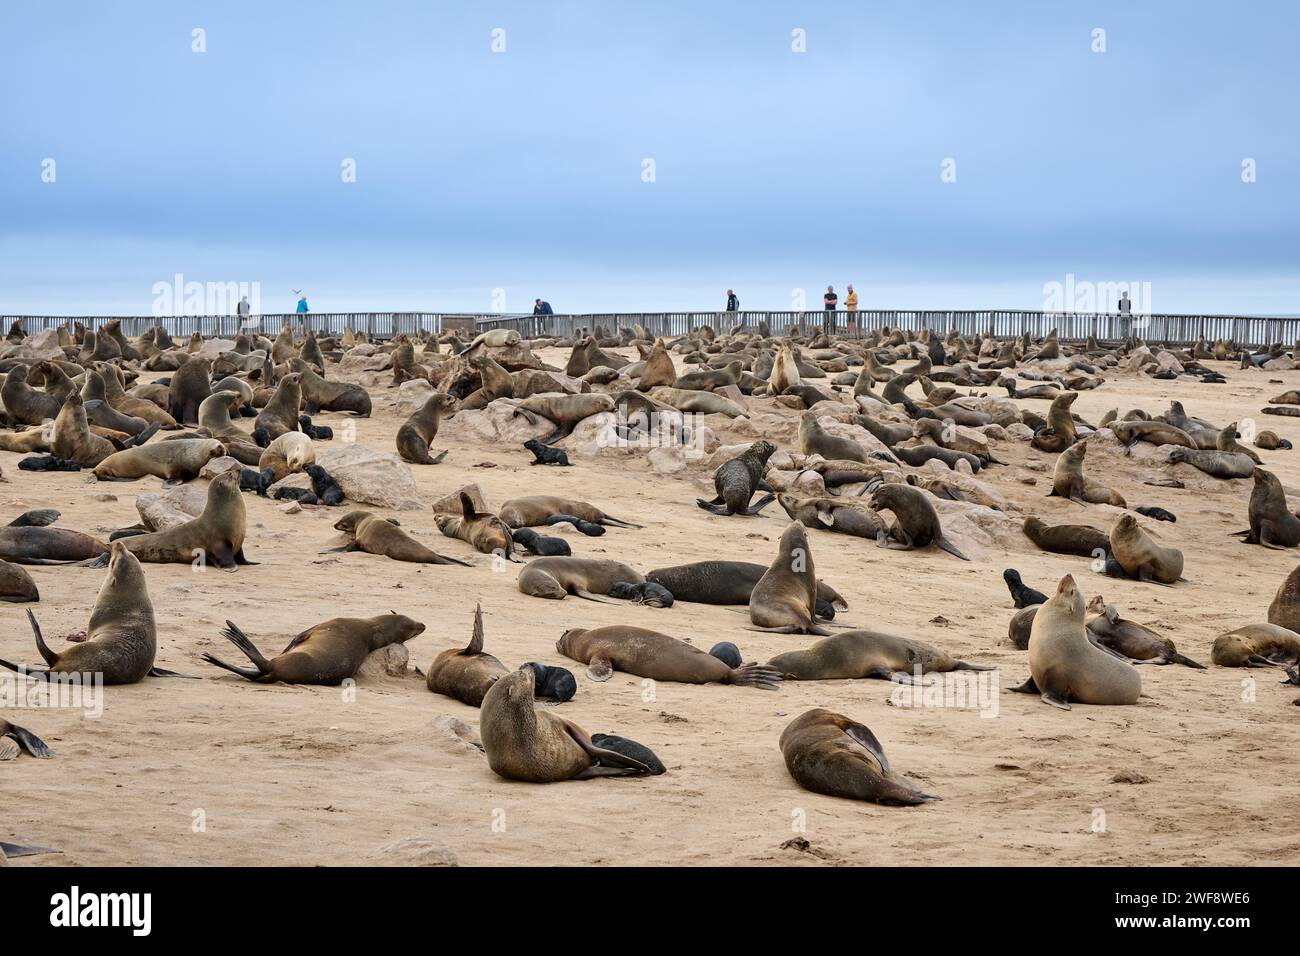 Brown fur seal colonies with babies and tourist on a boardwalk behind, Cape Cross Seal Reserve, Namibia, Africa Stock Photo